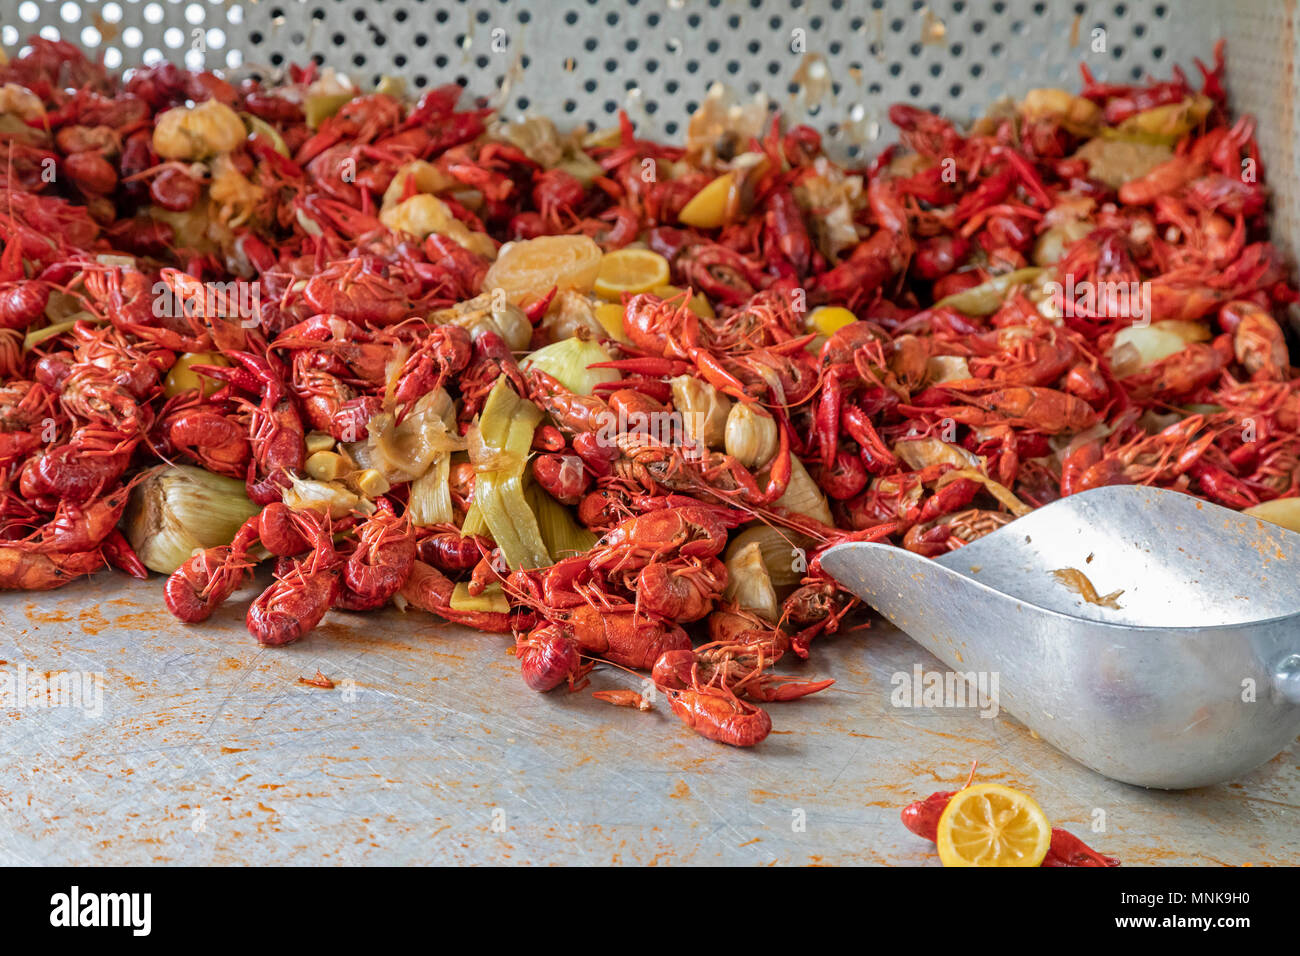 New Orleans, Louisiana - Crawfish on sale at the French Market. Stock Photo